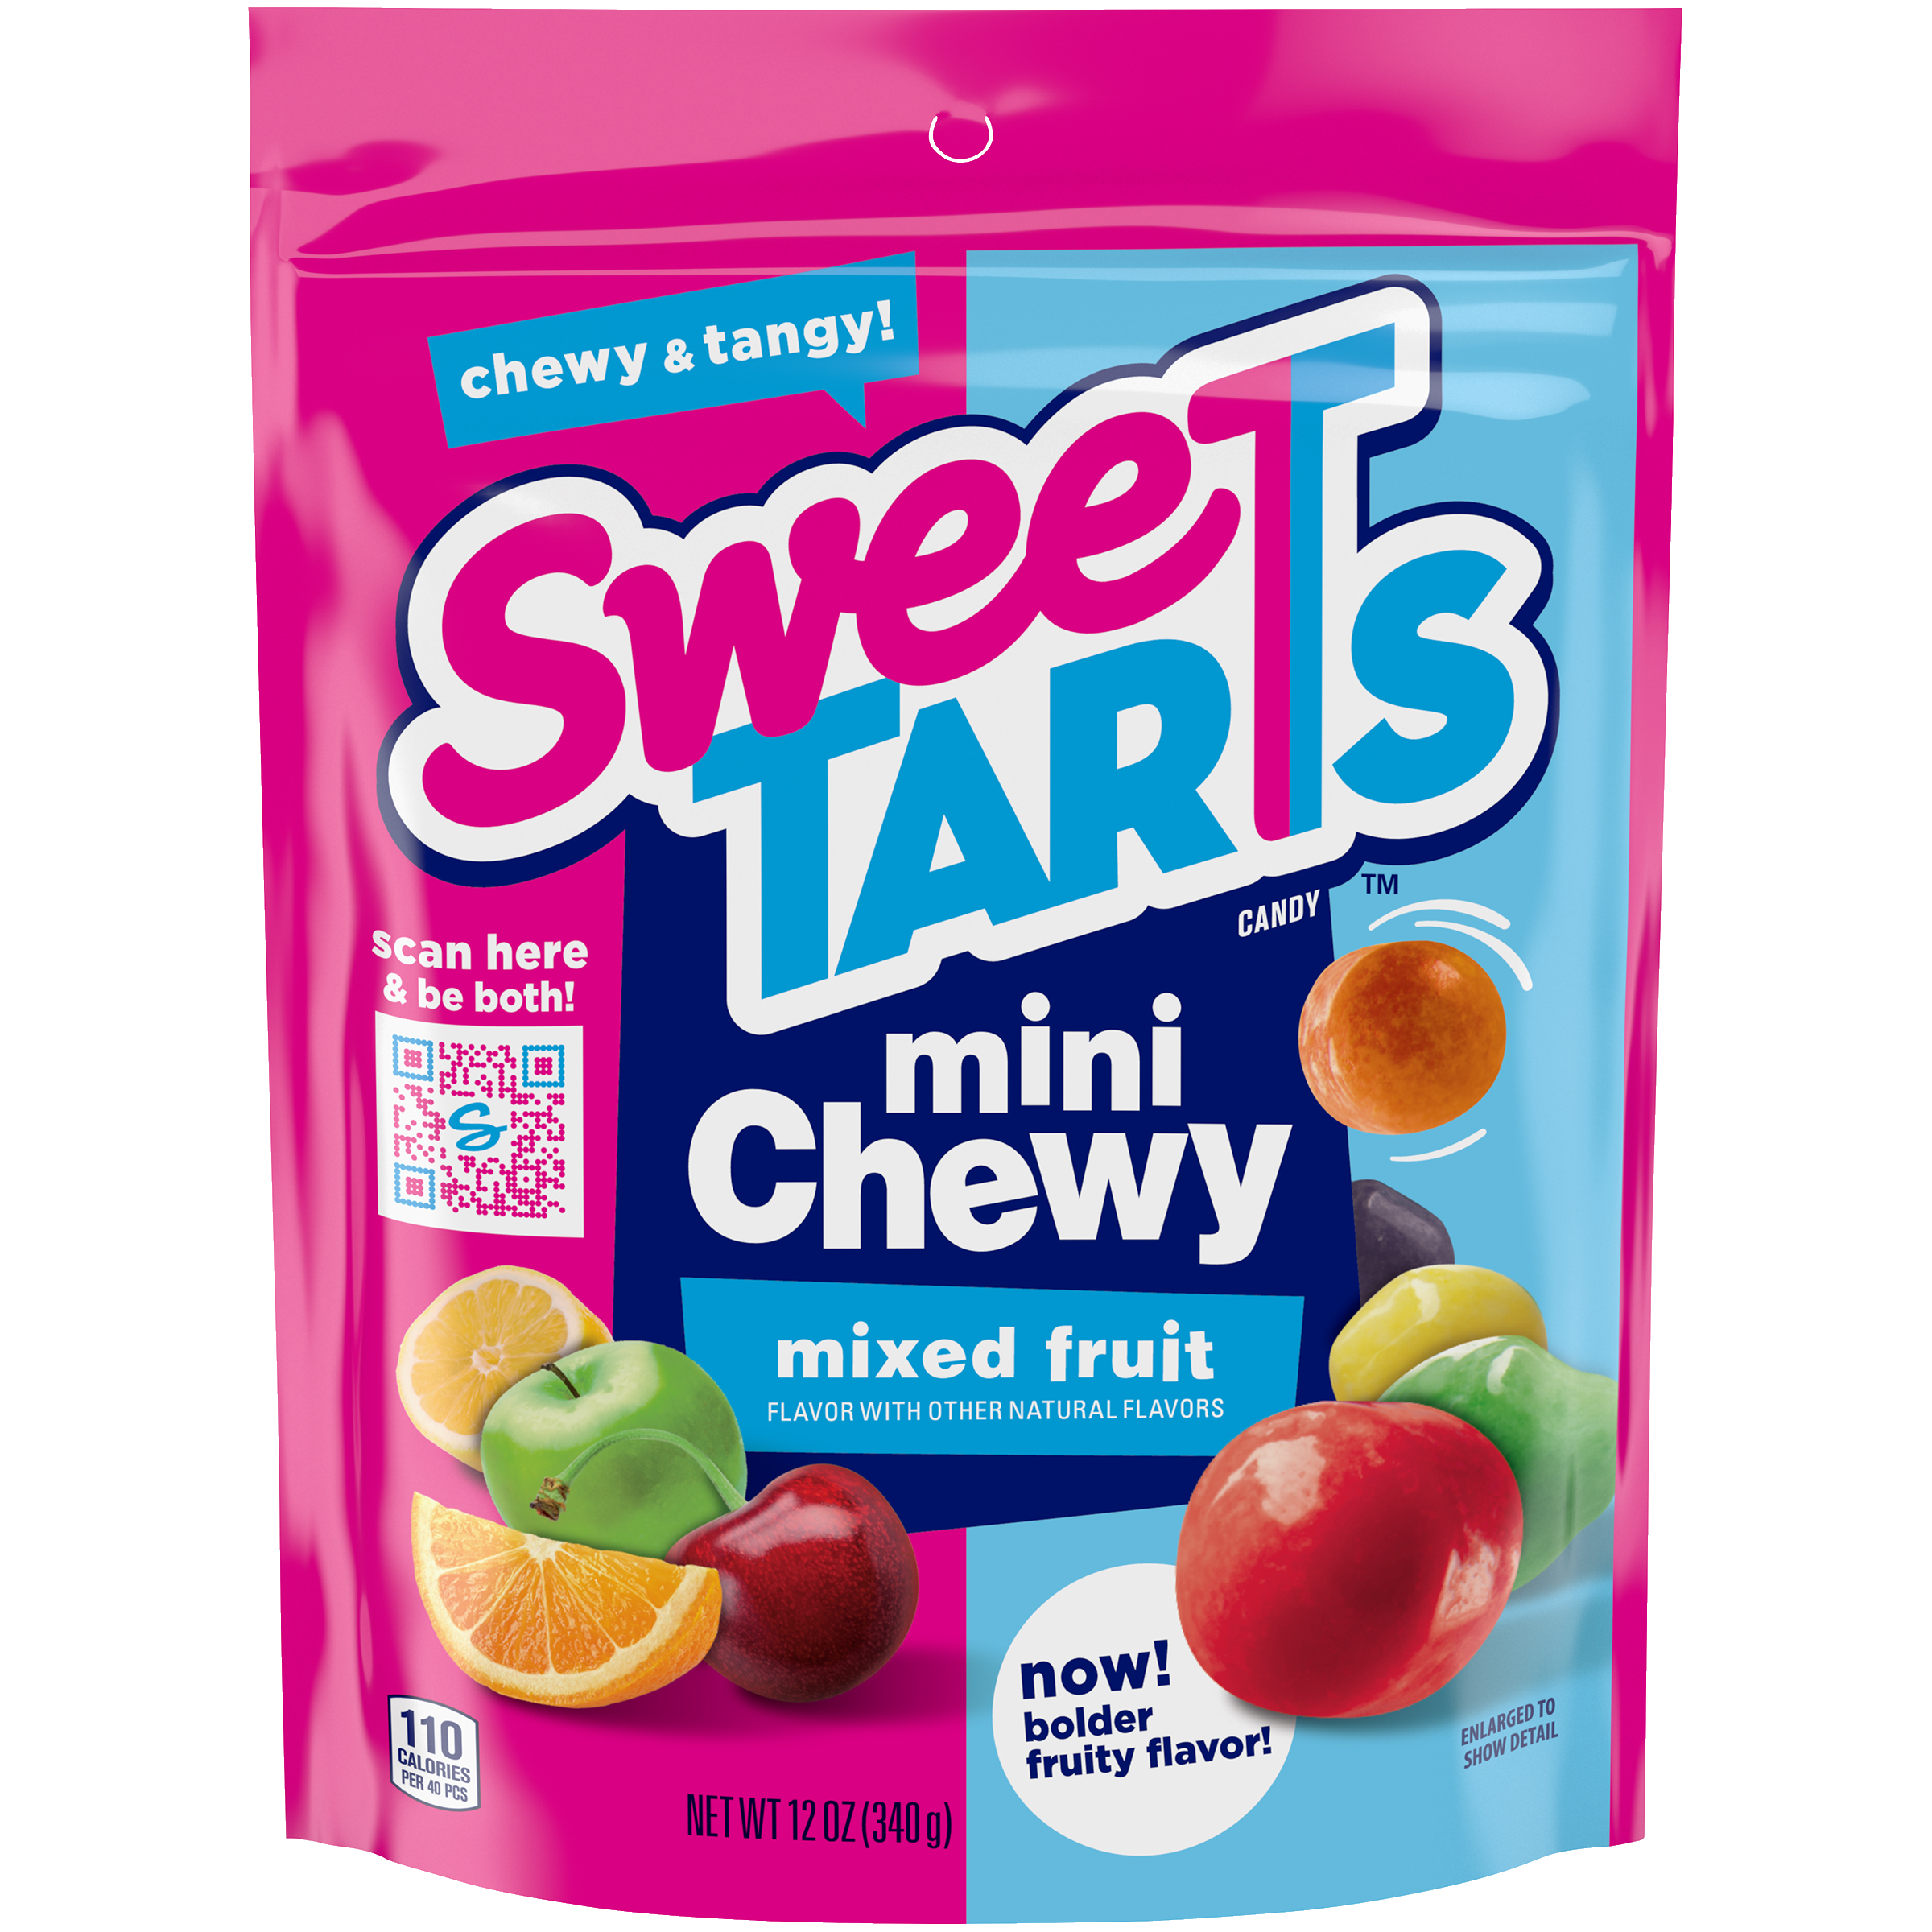 SweeTARTS Mini Chewy Candy, Mixed Fruit Flavored, 12 oz - image 1 of 7